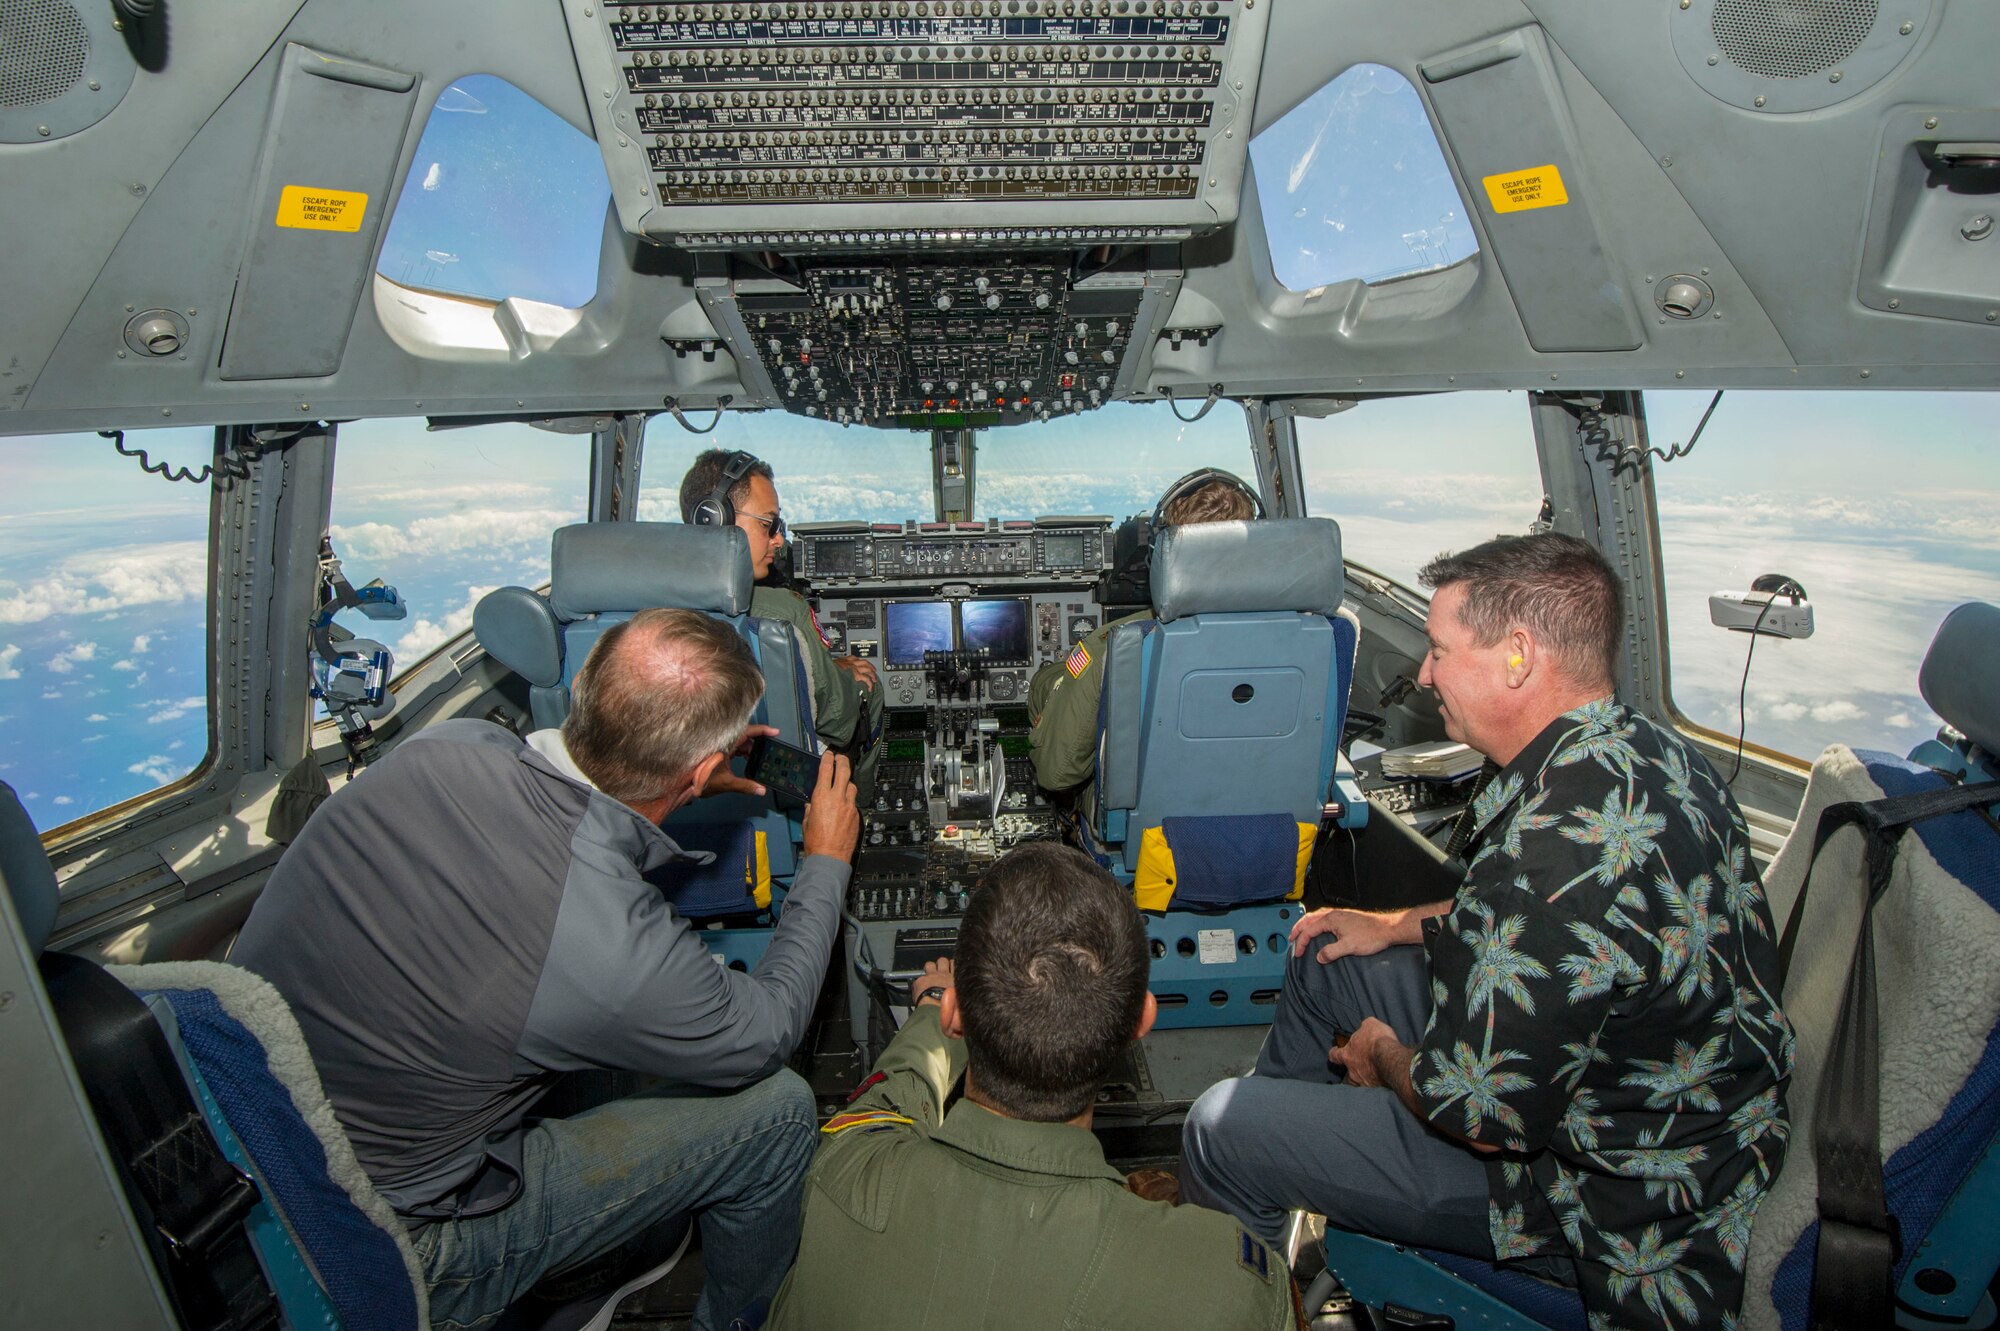 Members of the Pacific Air Forces’ Air Force Civilian Advisory Council take photos of an aerial refueling on board a C-17 Globemaster III assigned to the 535th Airlift Squadron, at Joint Base Pearl Harbor-Hickam, Hawaii, Aug. 20, 2019. Thirty-one AFCAC civic leaders attended a PACAF-hosted C-17 civic leader flight where they witnessed two refueling efforts by a KC-135 Stratofortress and one simulated C-17 cargo drop. Upon landing, AFCAC observed a heritage celebration for Staff Sgt. Ryan Myers and Maj. Freddy Rodriguez’s “fini” flight. (U.S. Air Force photo by Staff Sgt. Jack Sanders)